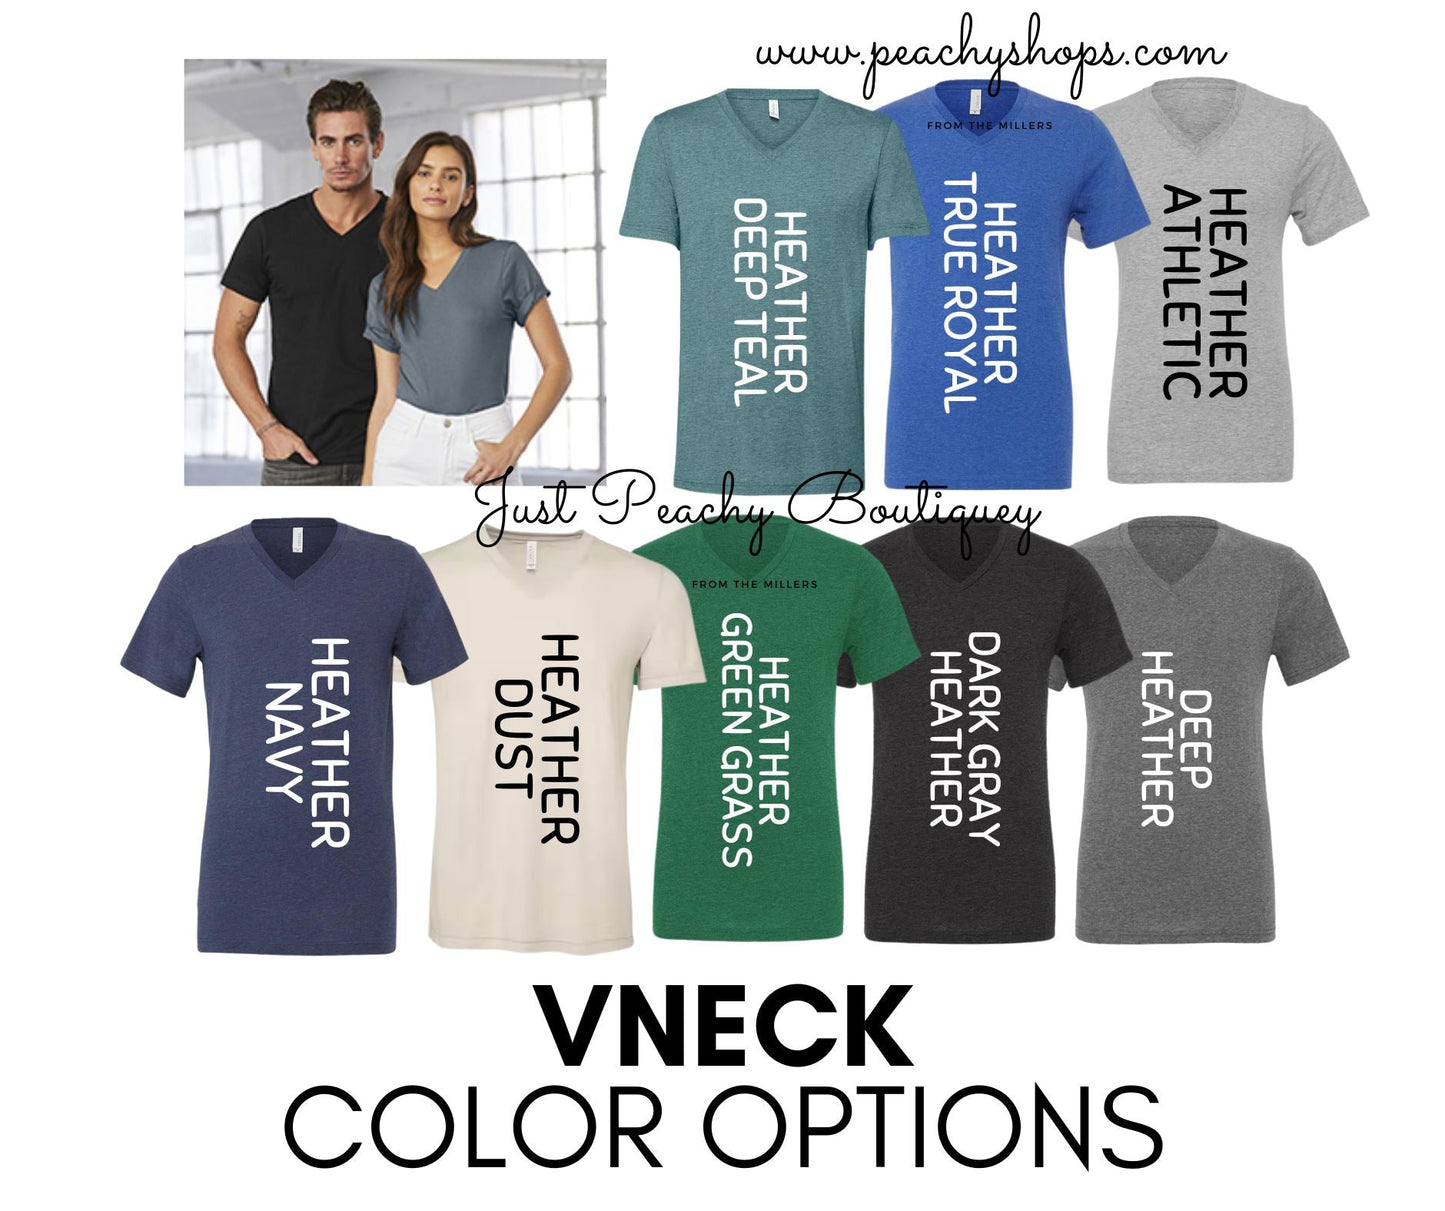 OUTDOORSY T-SHIRT SWEATER OR TANK TOP